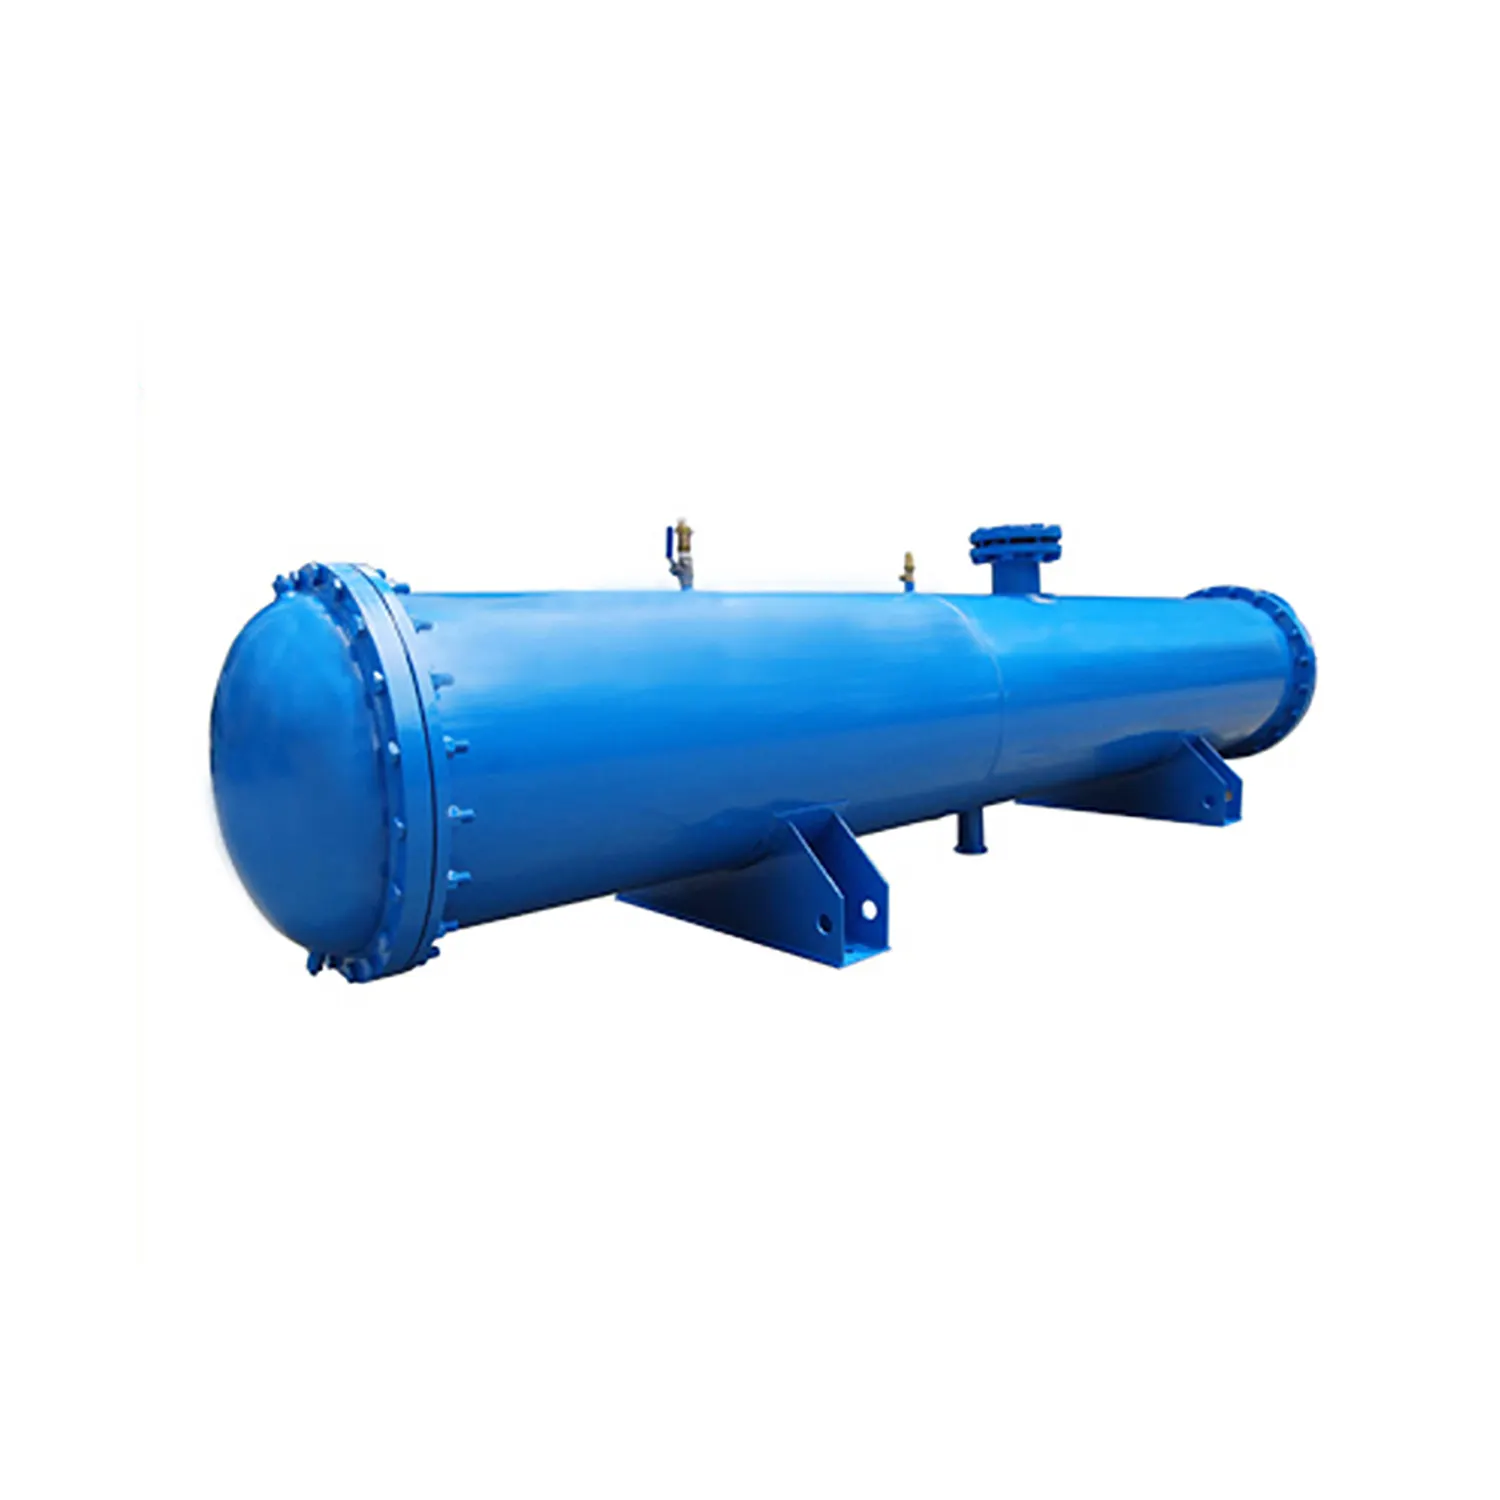 Sea Water Condenser/Shell and Tube Heat Exchanger